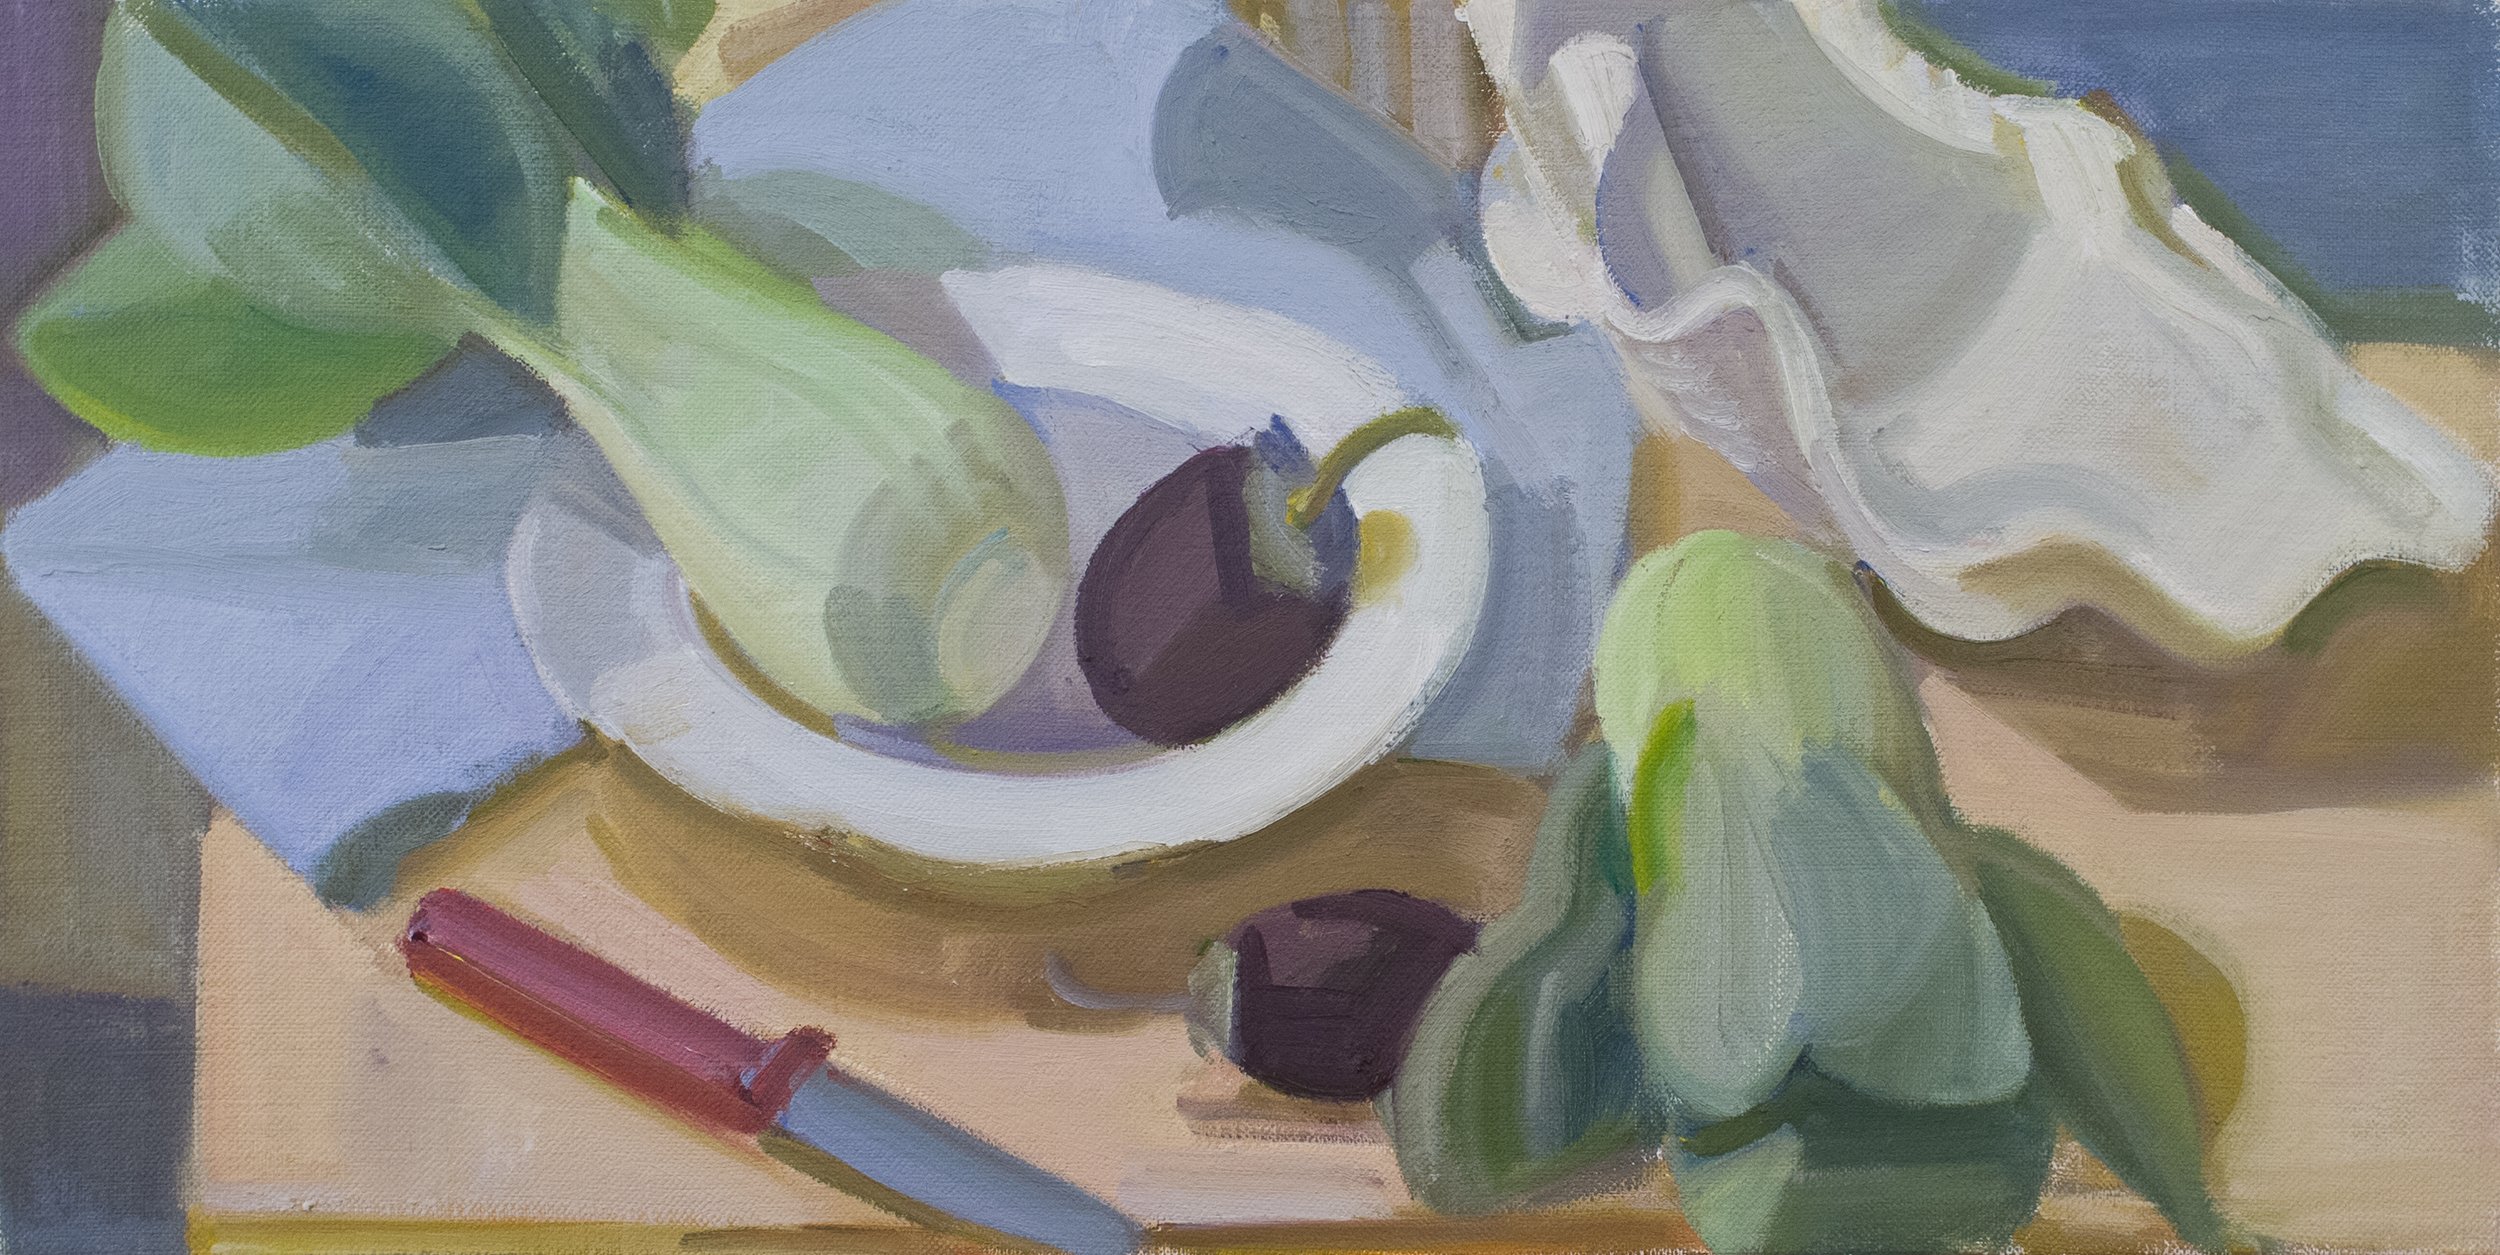   Bok Choy, Eggplant, Shell and Knife , c. 2012, oil/panel, 10 x 20 in. (Private collection) 